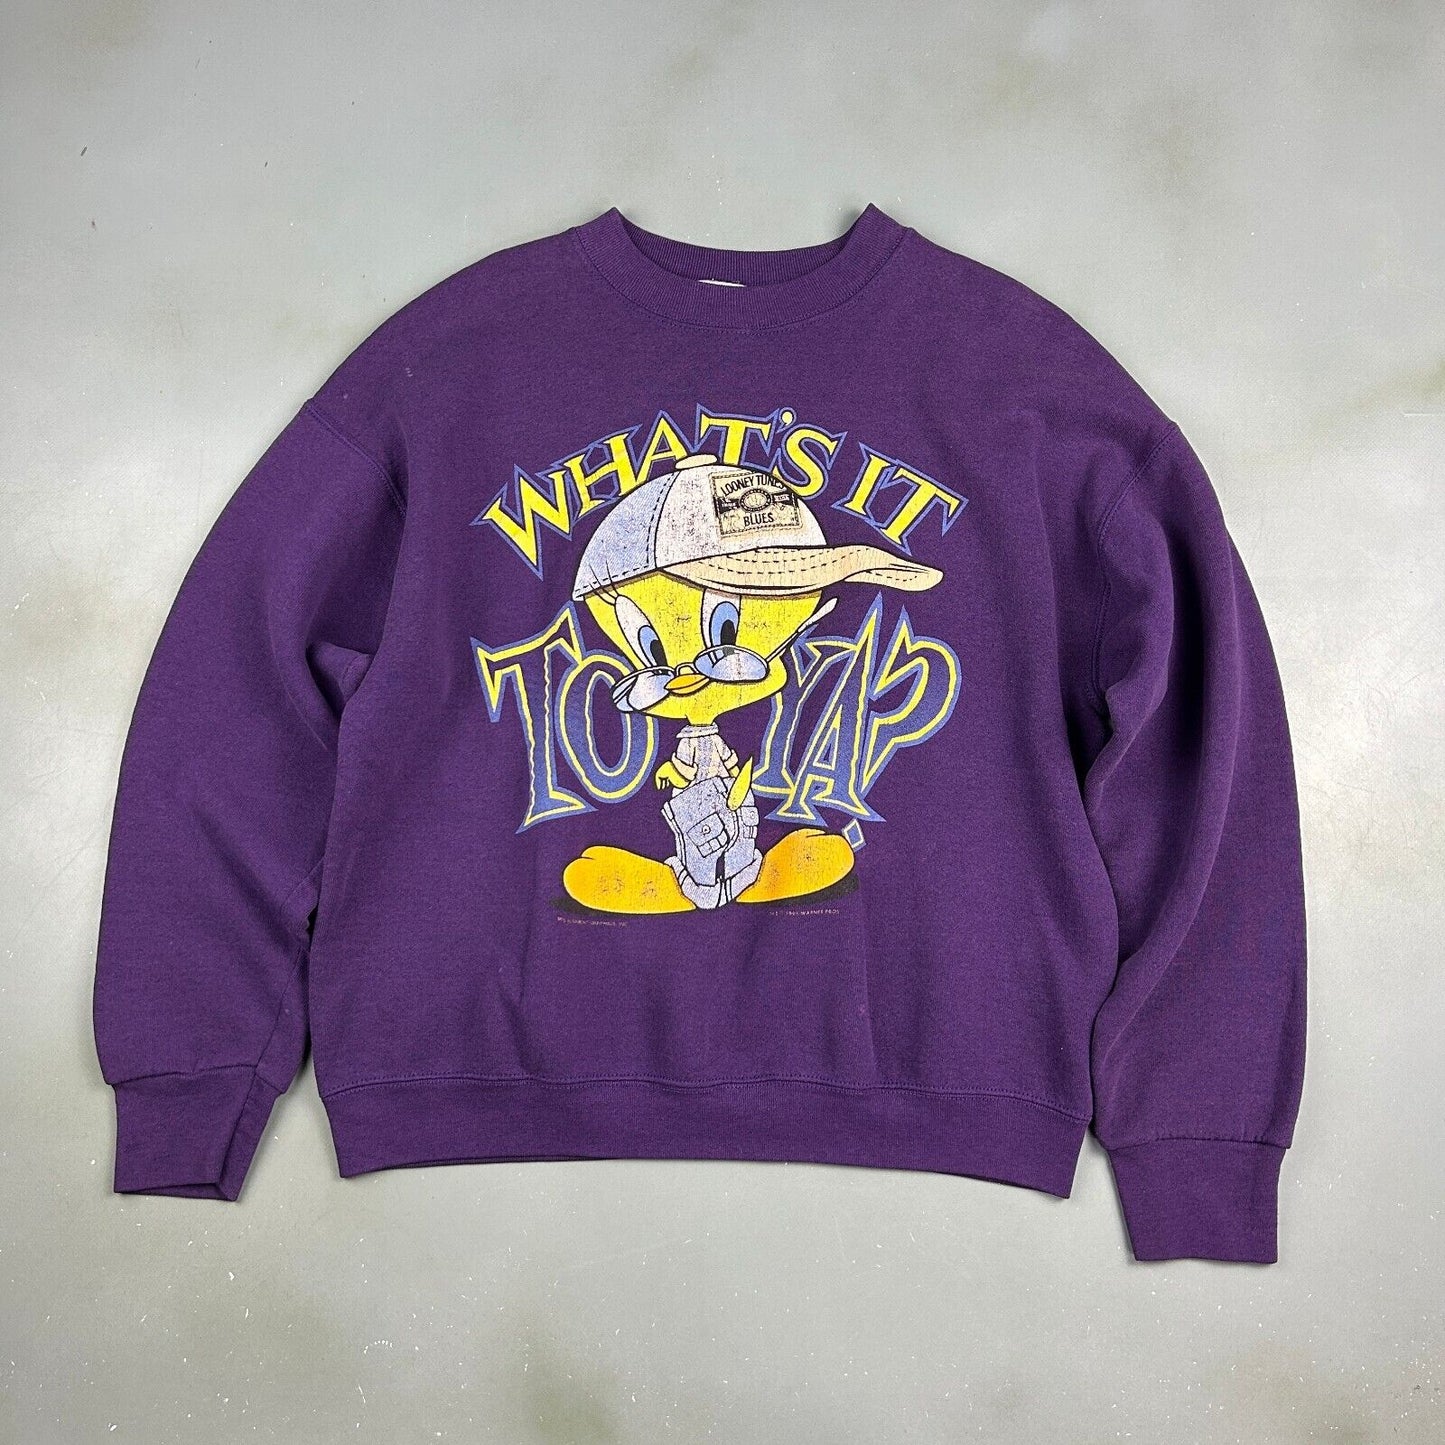 VINTAGE 1995 Tweety Whats It To Ya? Looney Tunes Sweater sz Large Adult